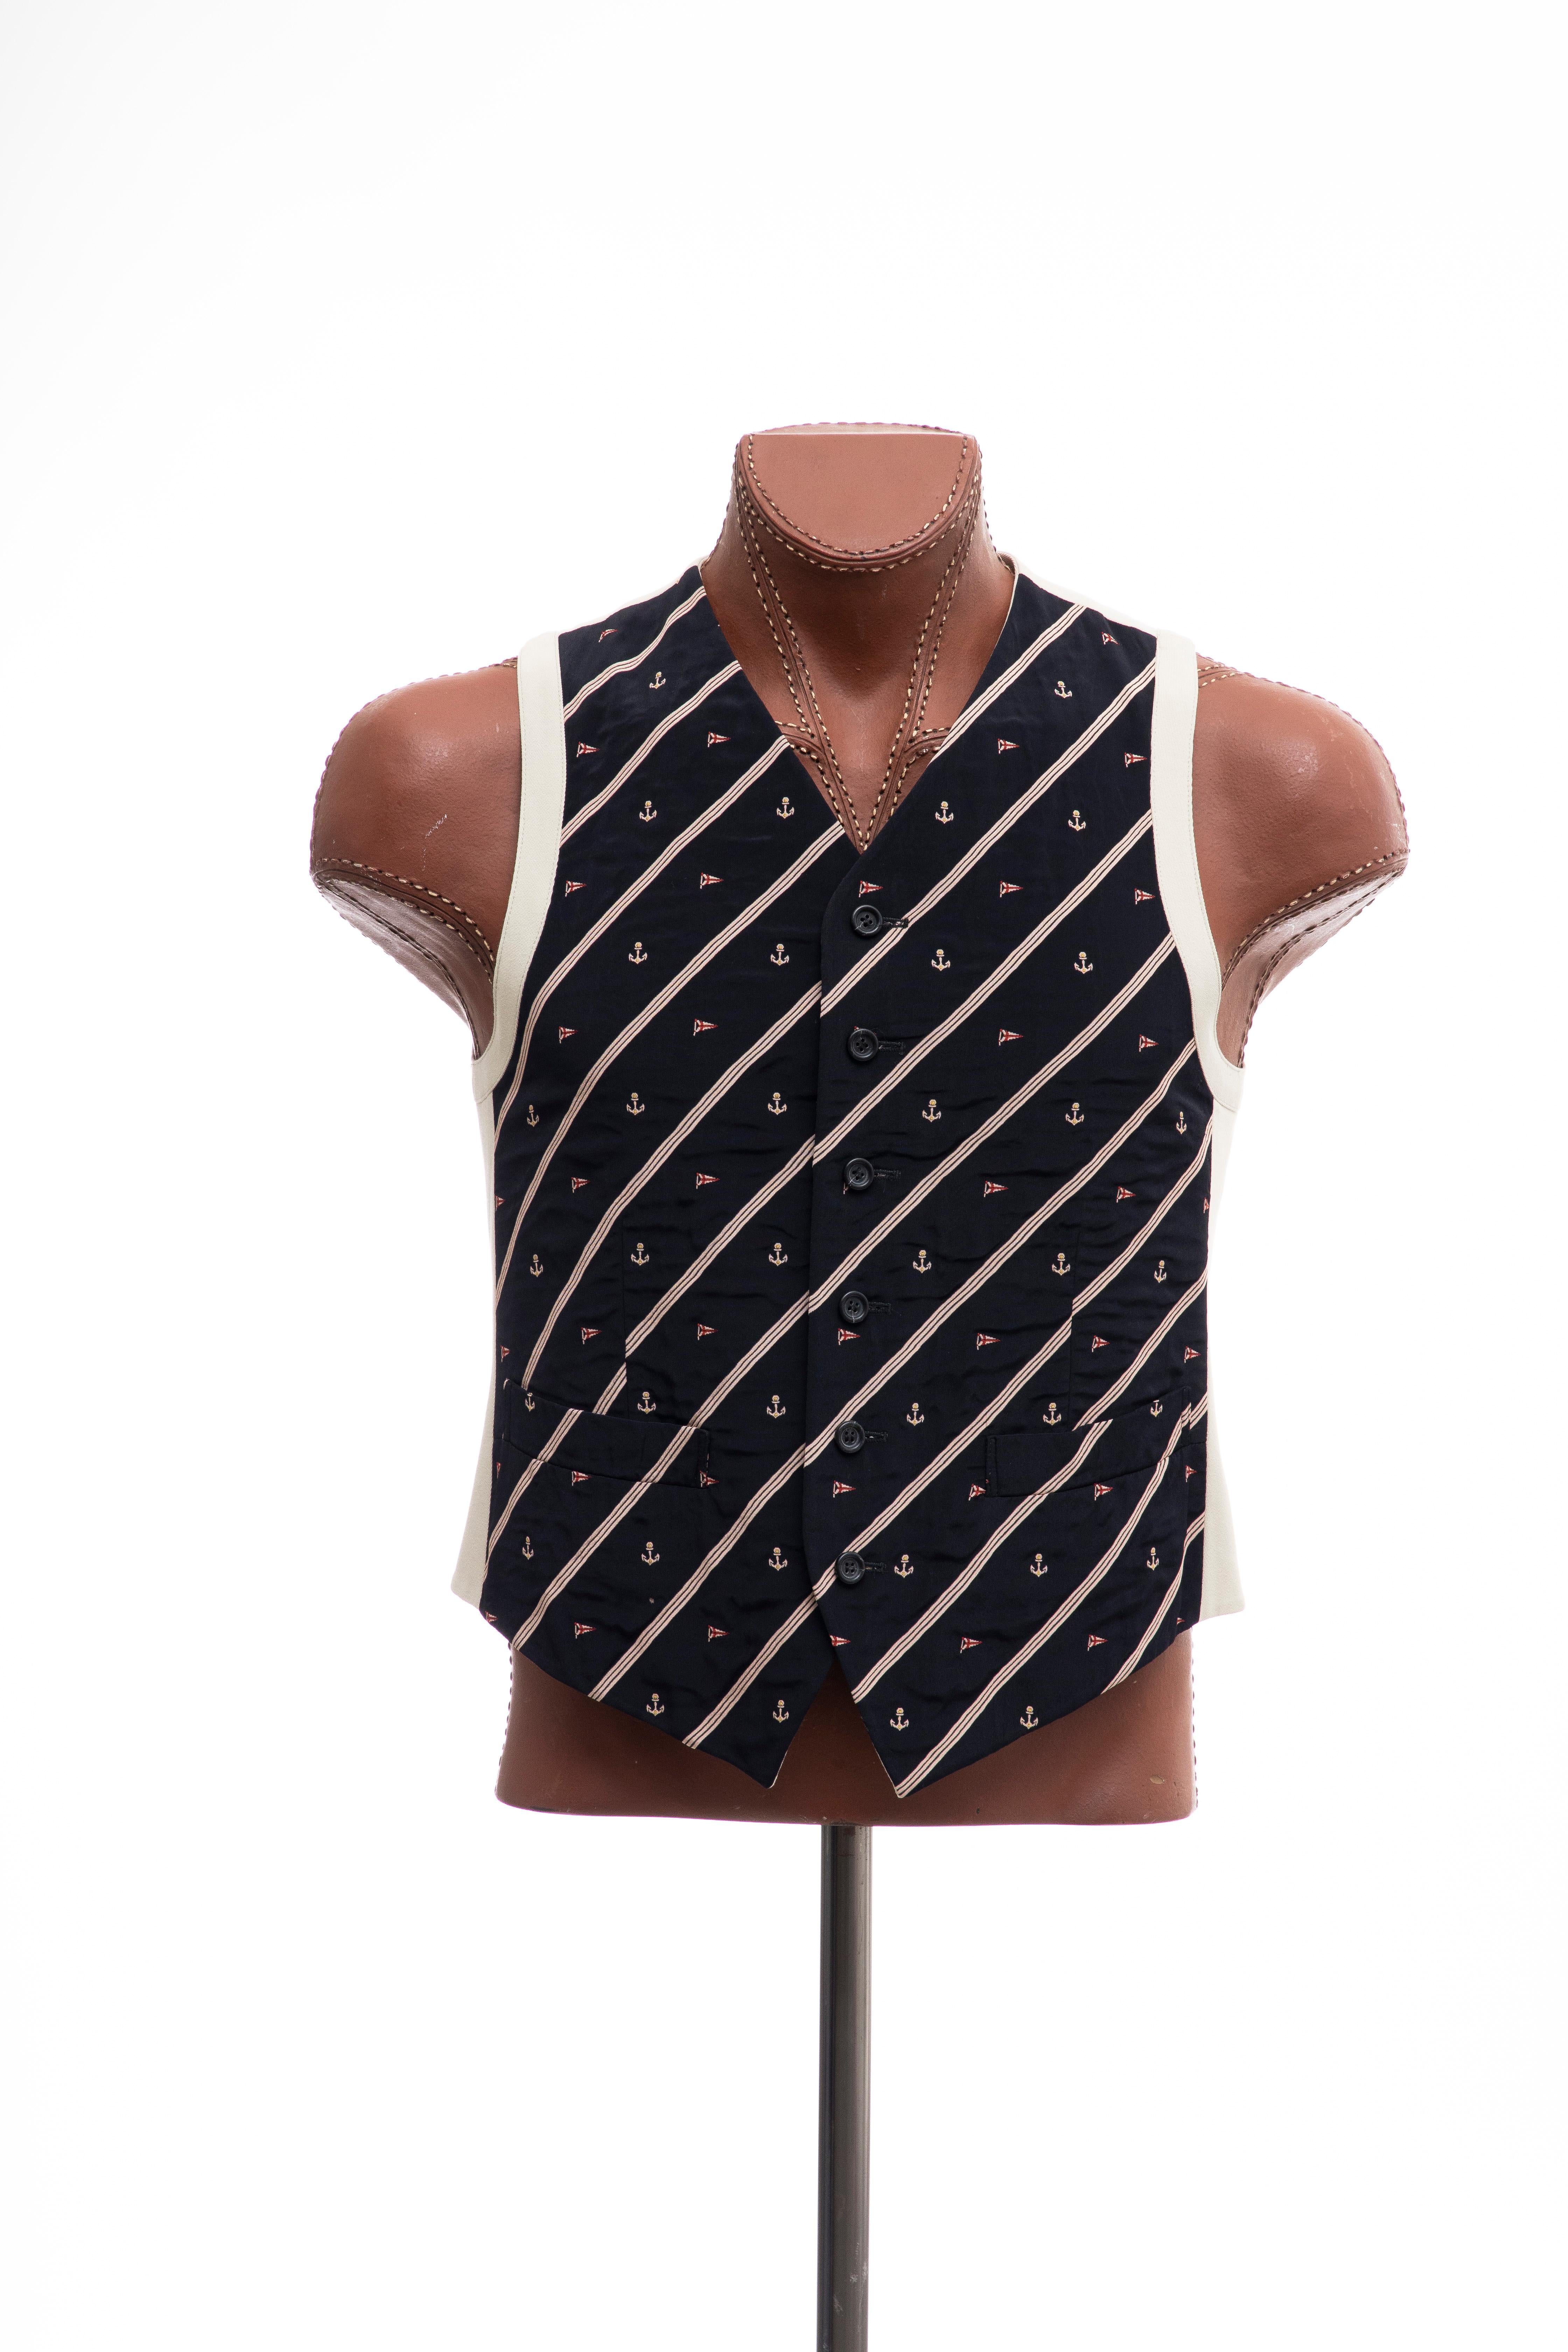 Dries Van Noten suit vest with nautical motifs and stripes at front,dual welt pockets at front, tonal satin lining and button closures at front.

IT. 48, US. 8

Chest: 40, Length: 24

Fabric: 48% Acetate, 48% Rayon, 4% Polyester